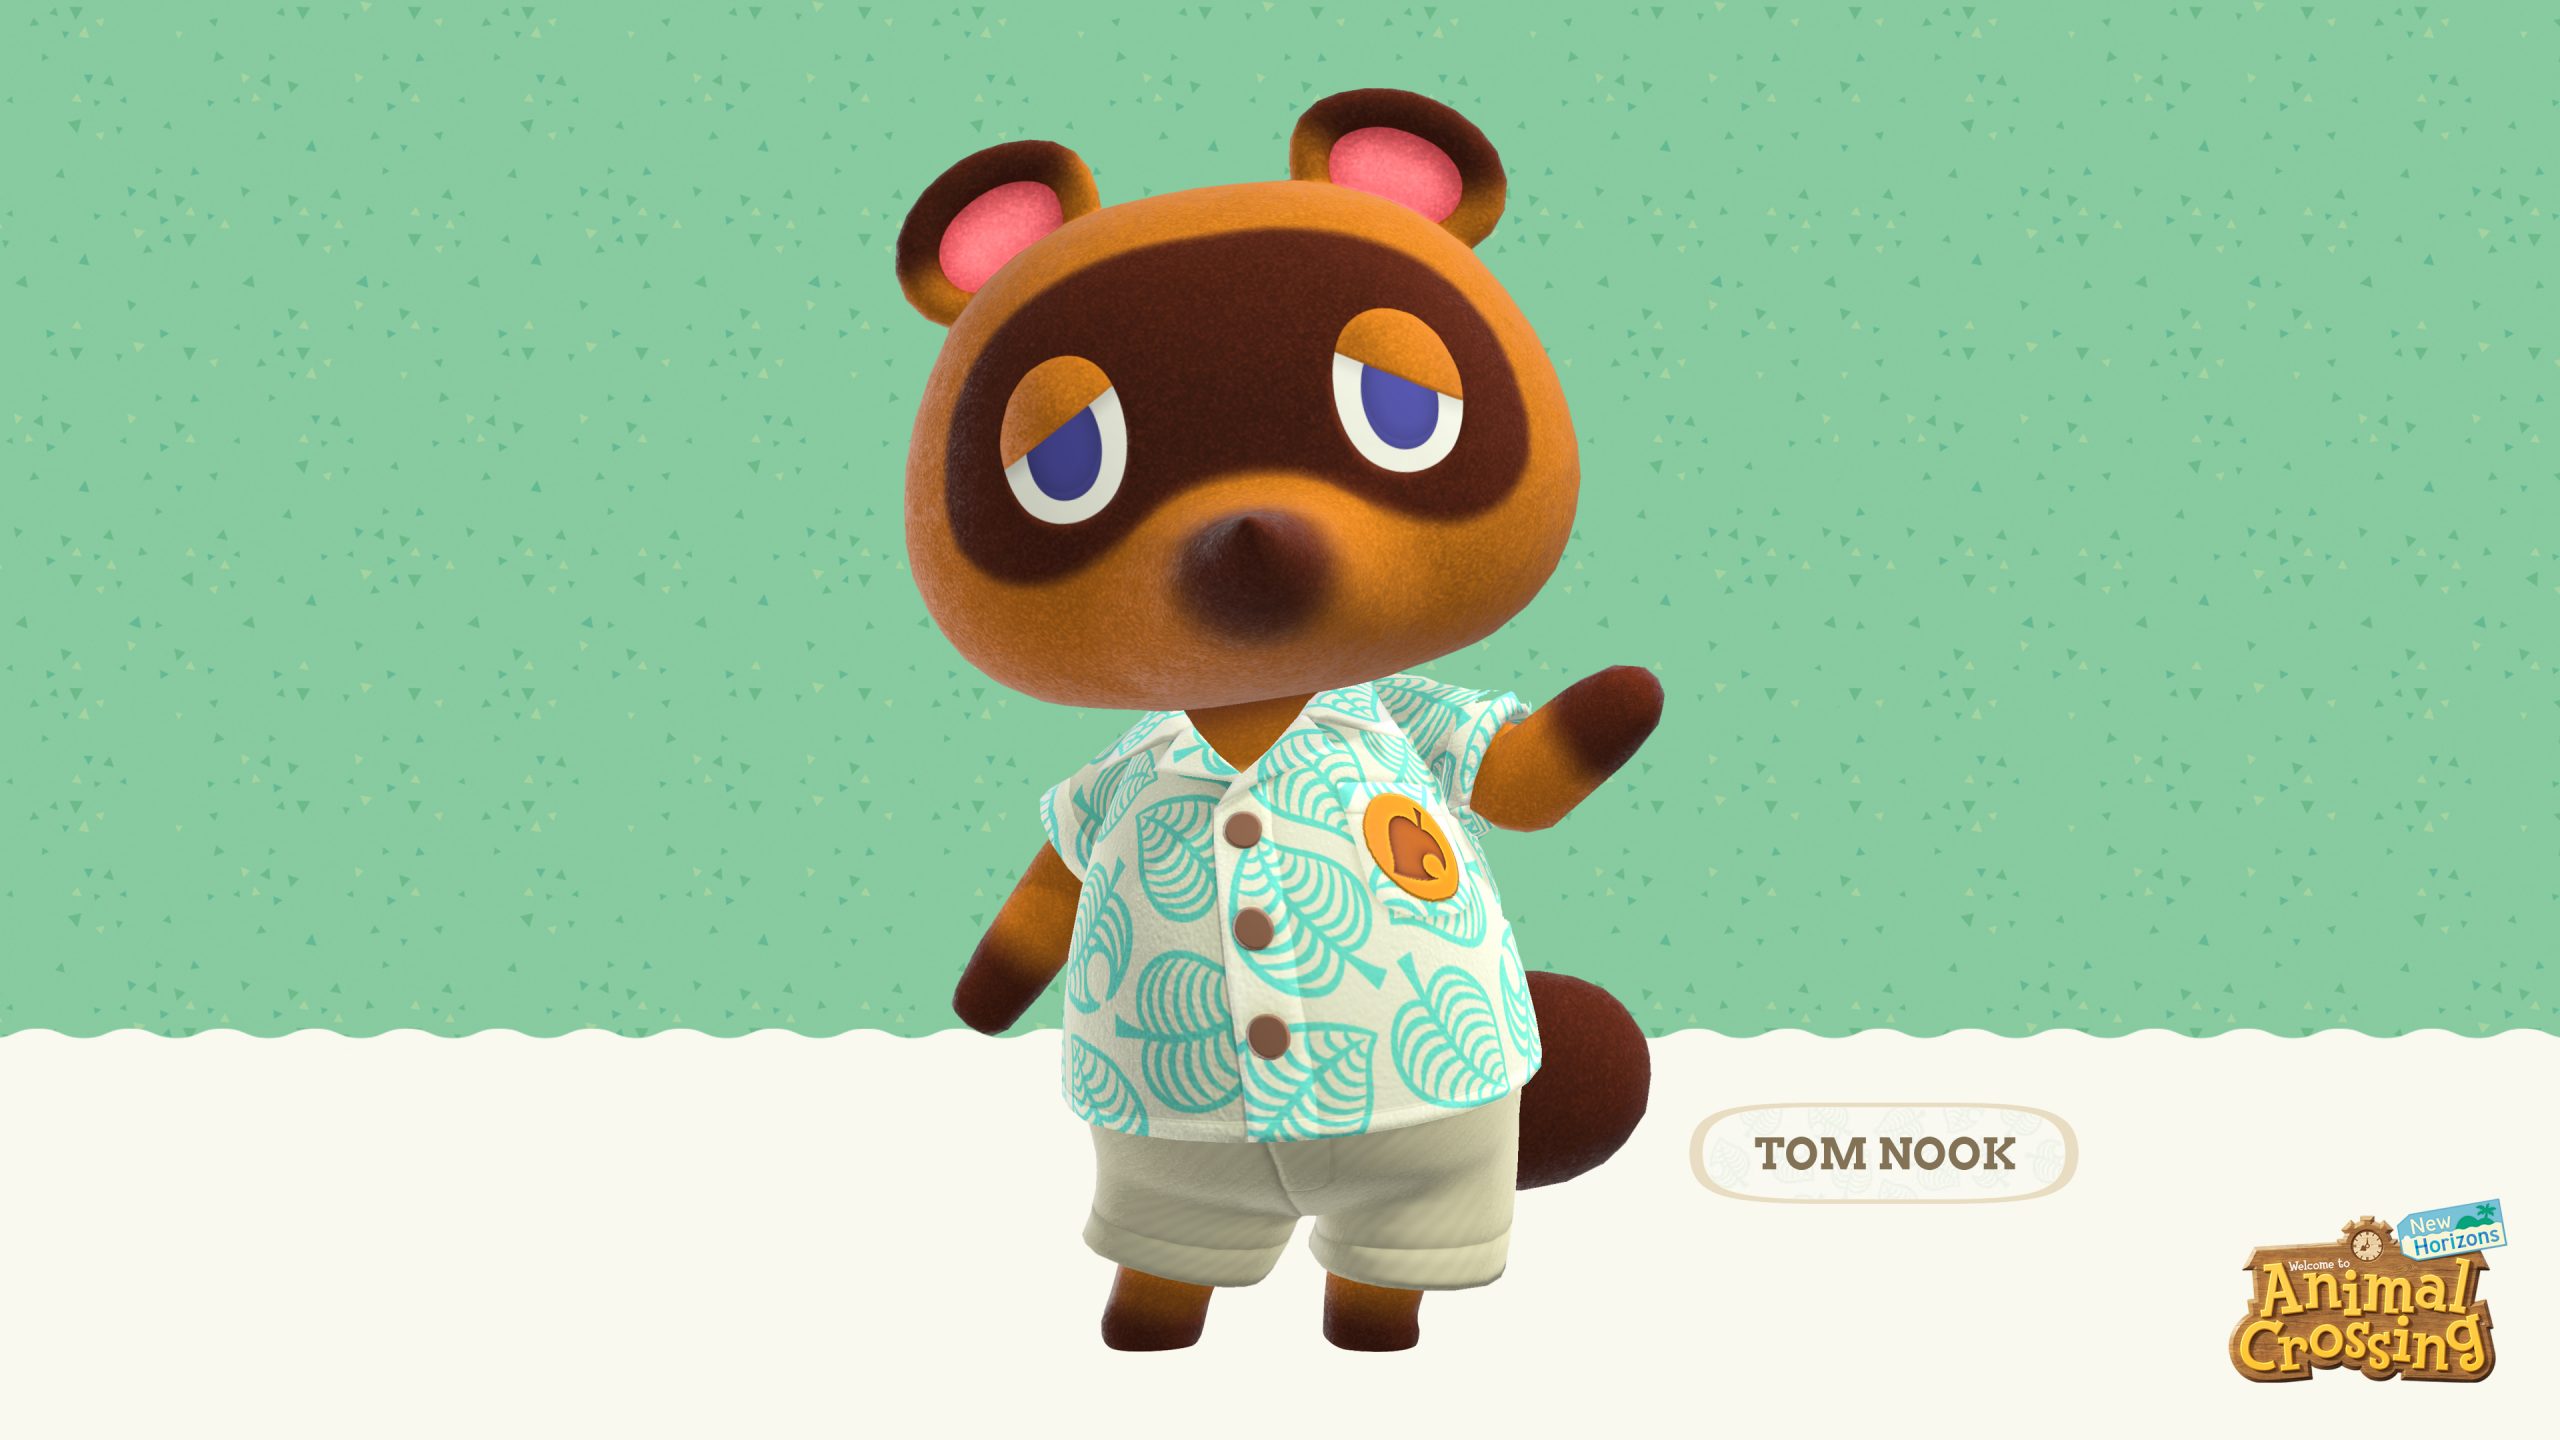 Tom Nook Animal Crossing New Horizons Characters